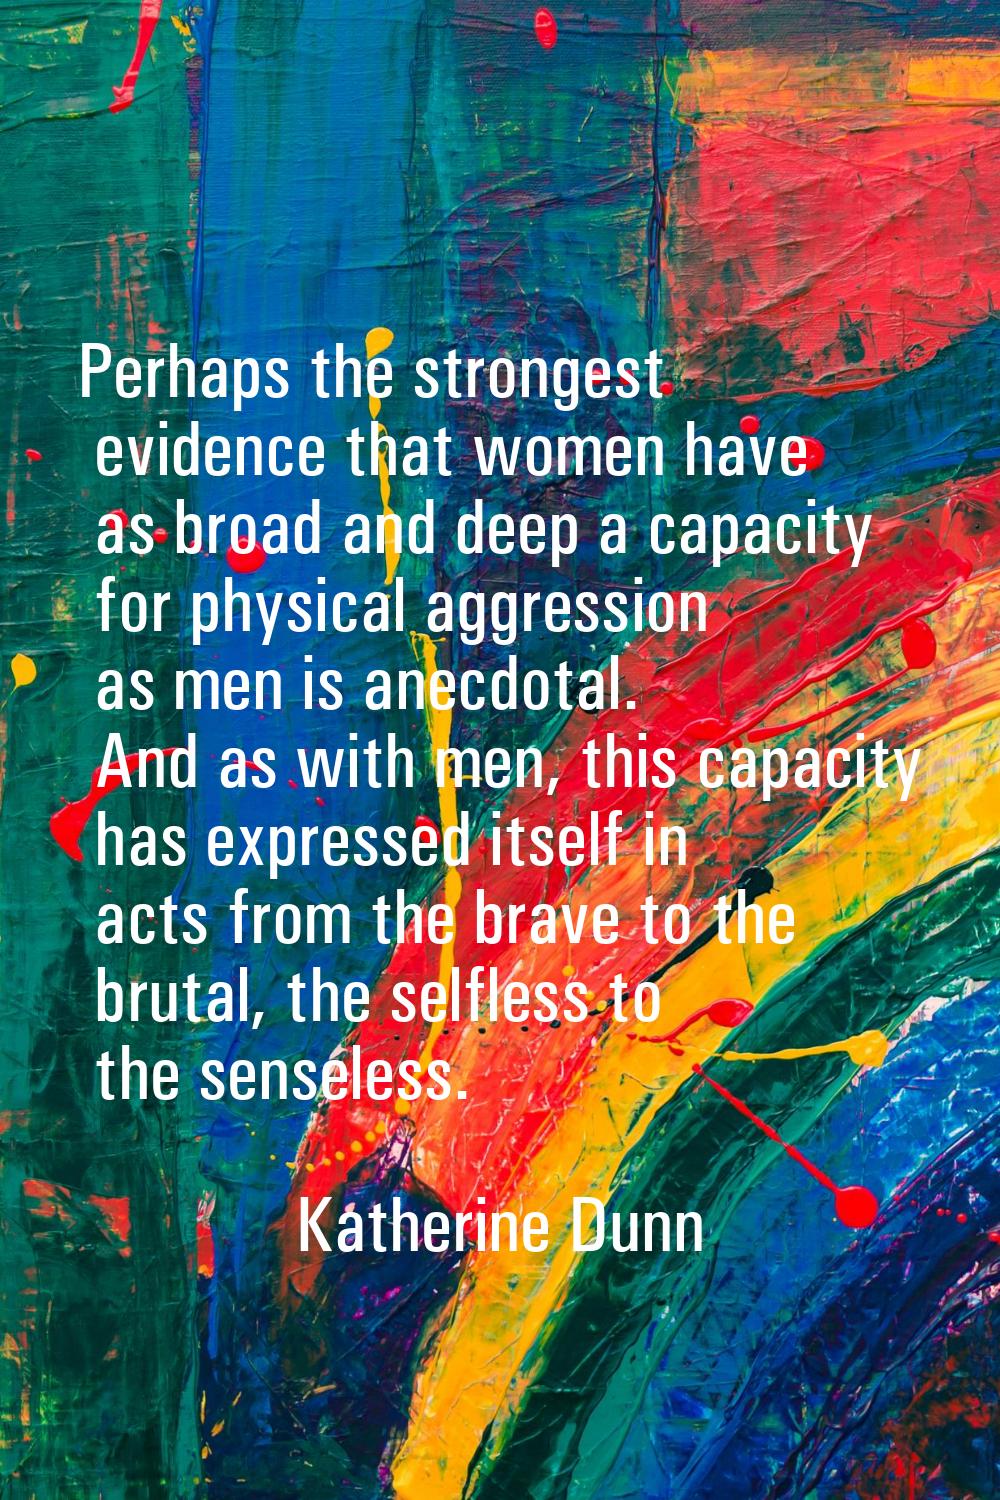 Perhaps the strongest evidence that women have as broad and deep a capacity for physical aggression